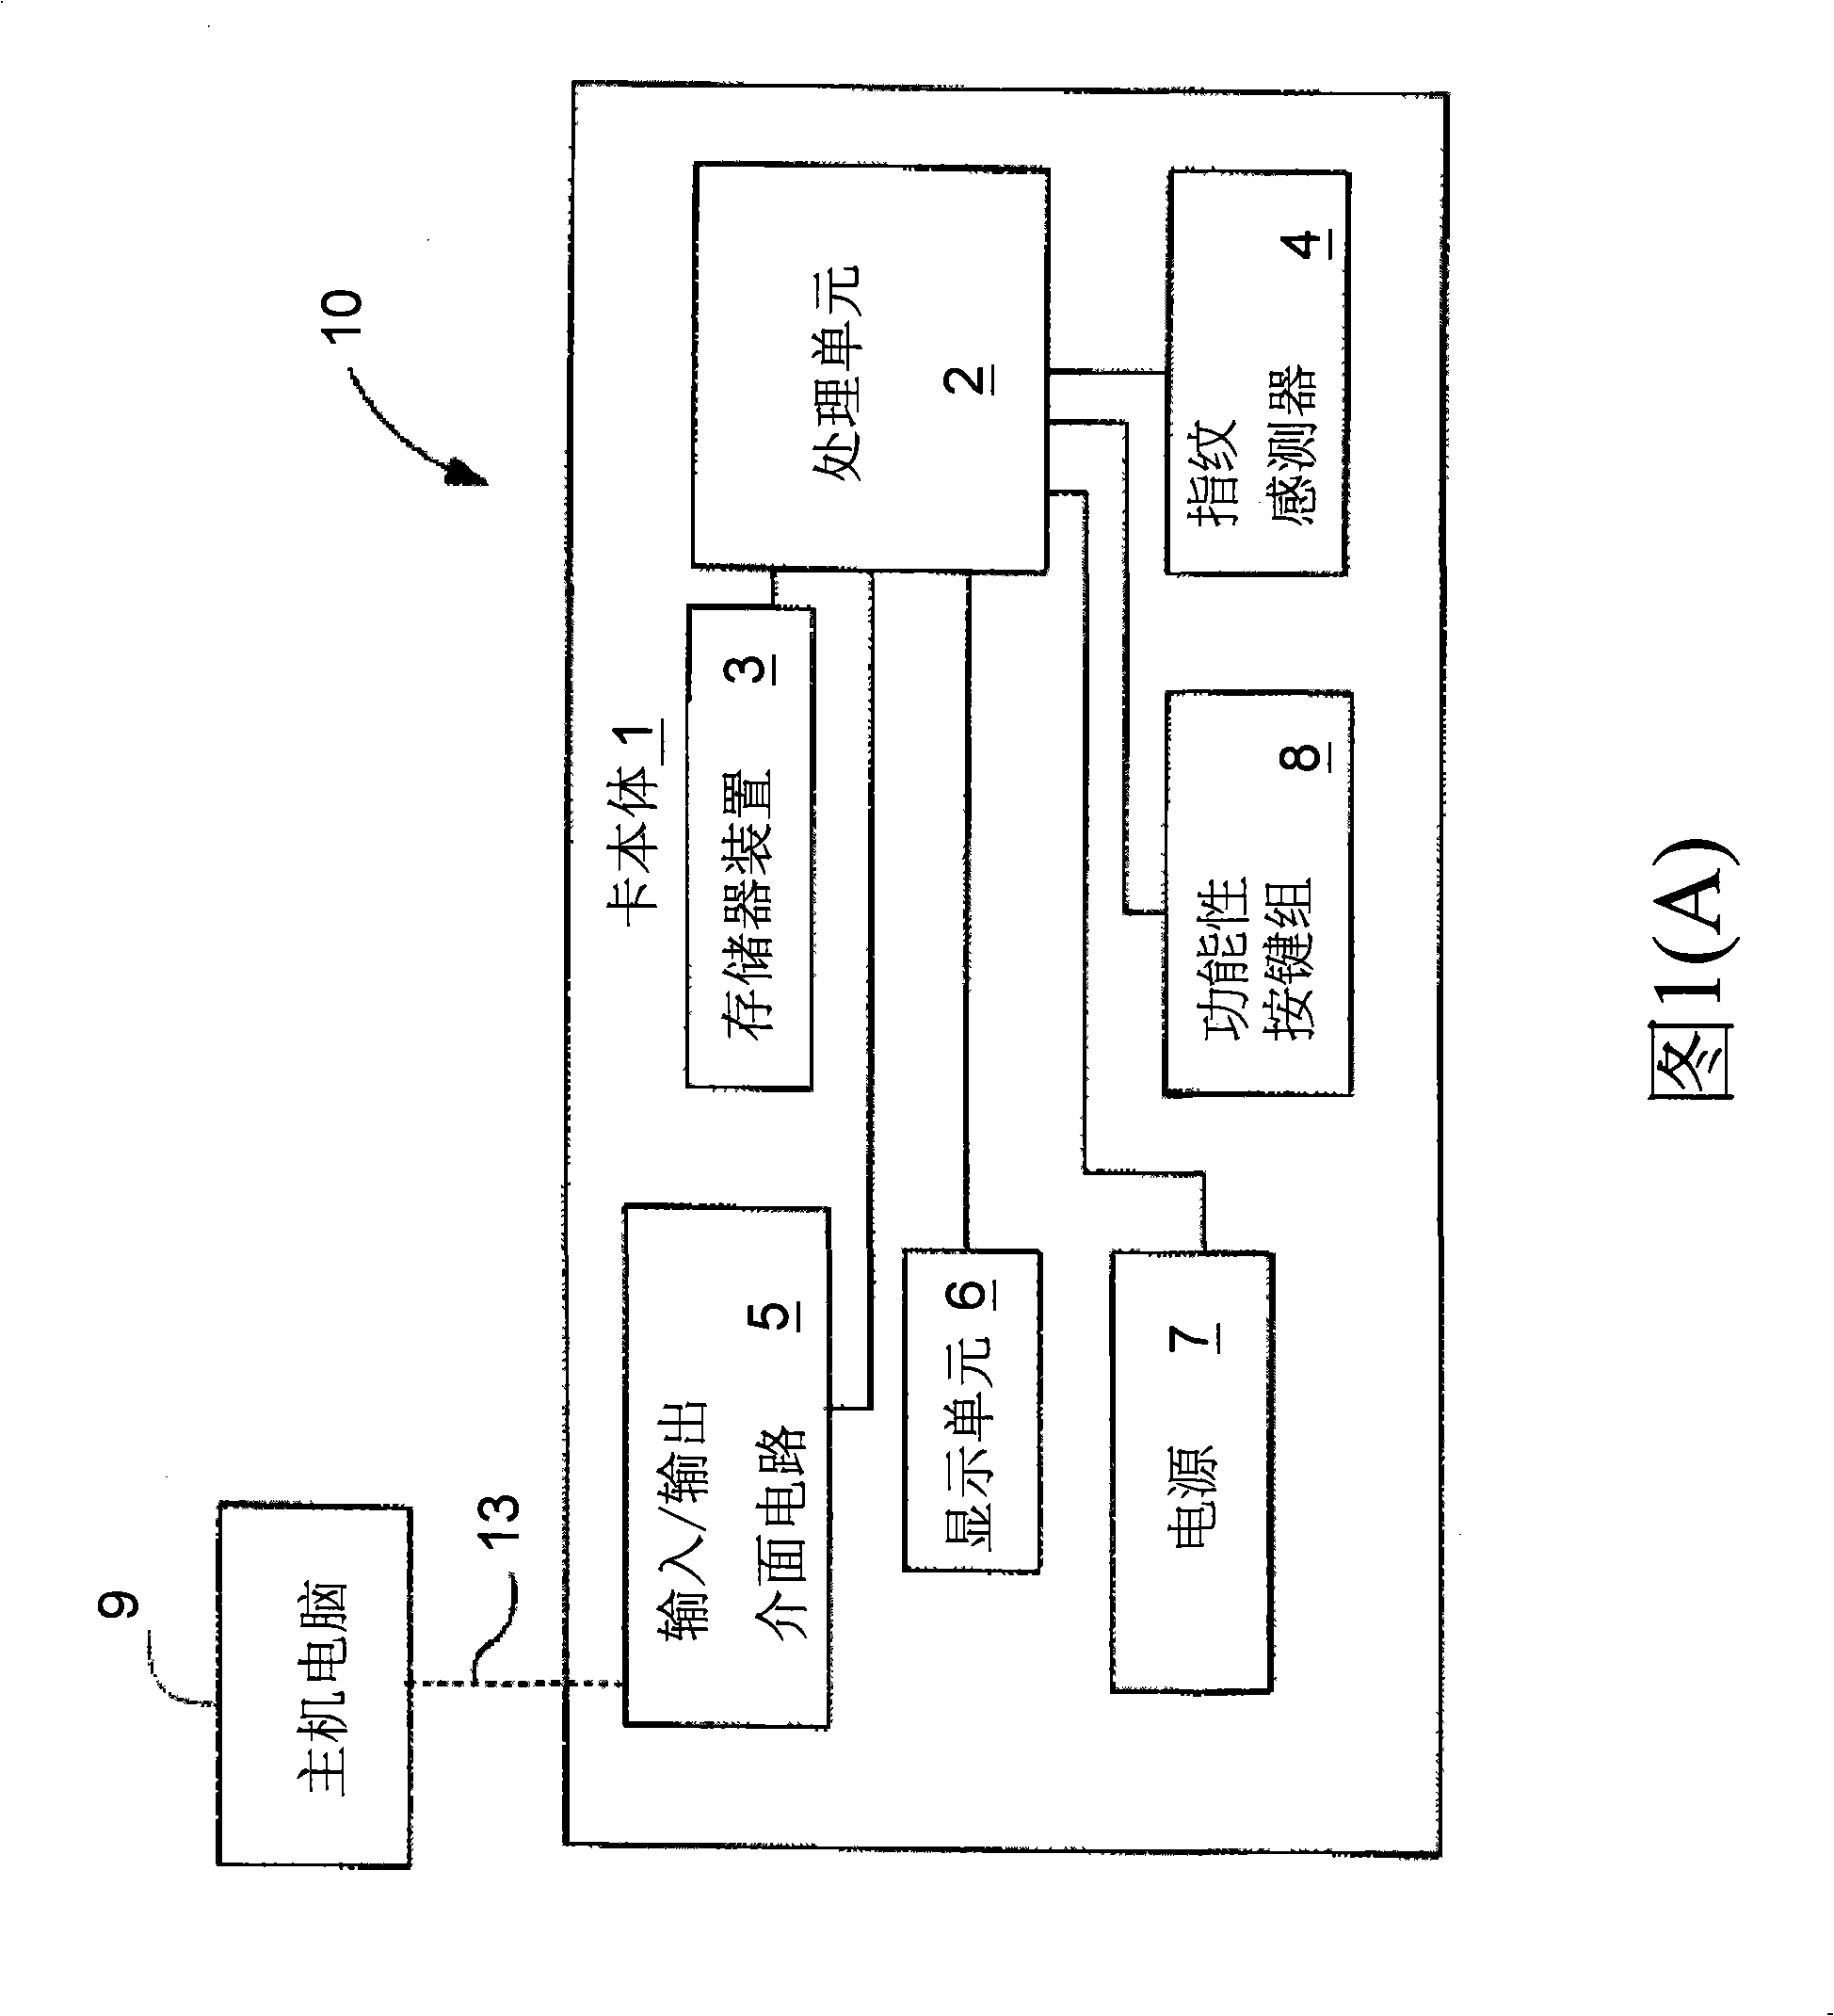 Method for formatting/testing general sequence bus device